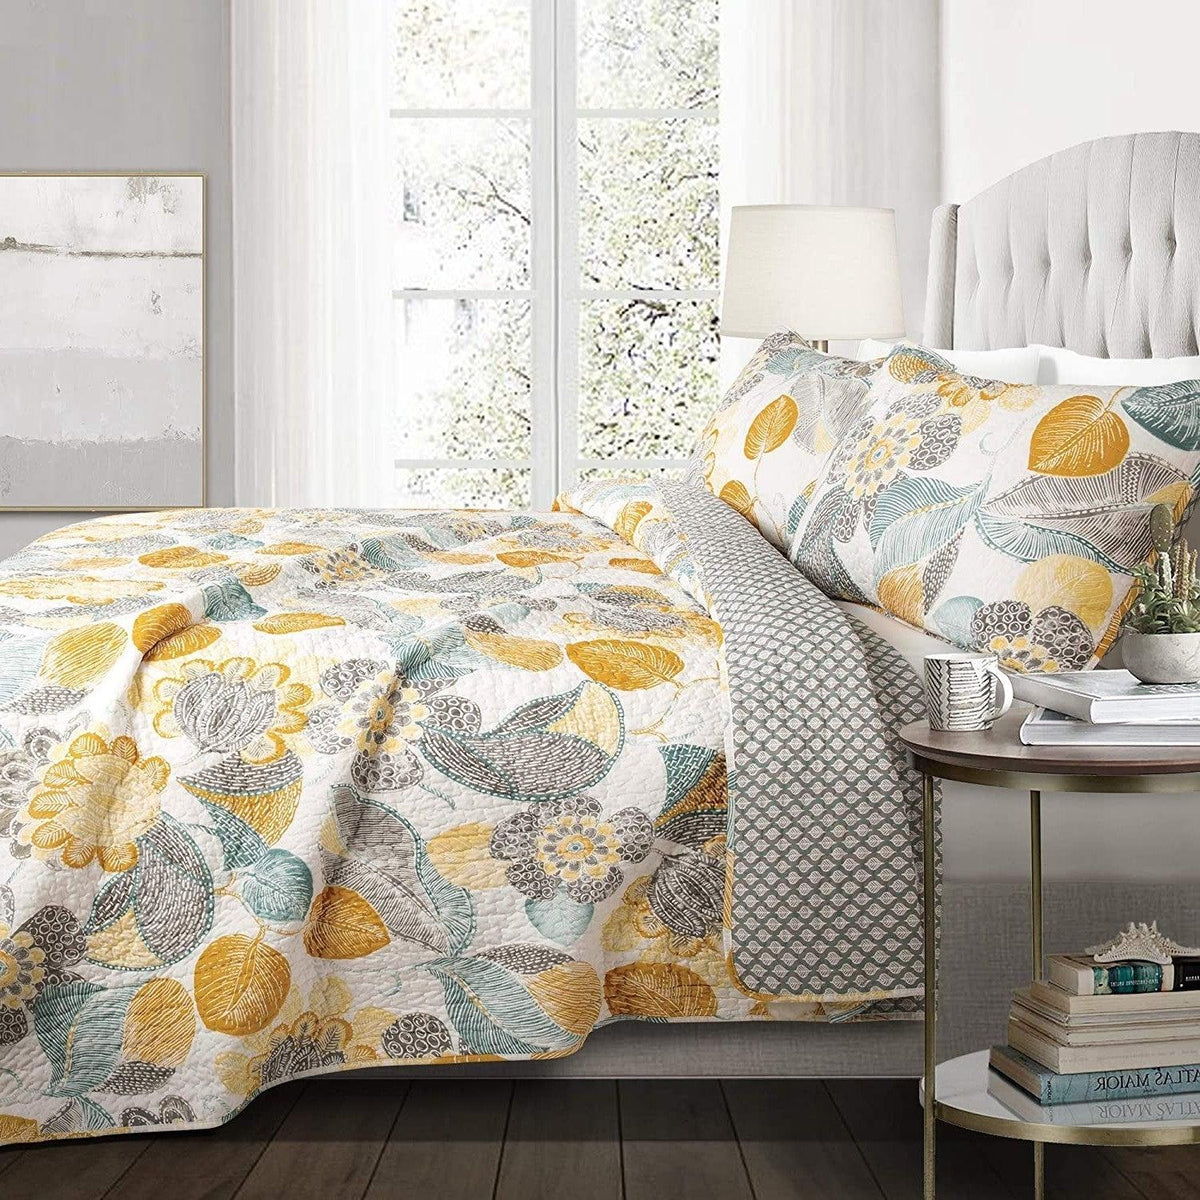 3 Piece Reversible Yellow Grey Floral Cotton Quilt Set in King Size - beddingbag.com